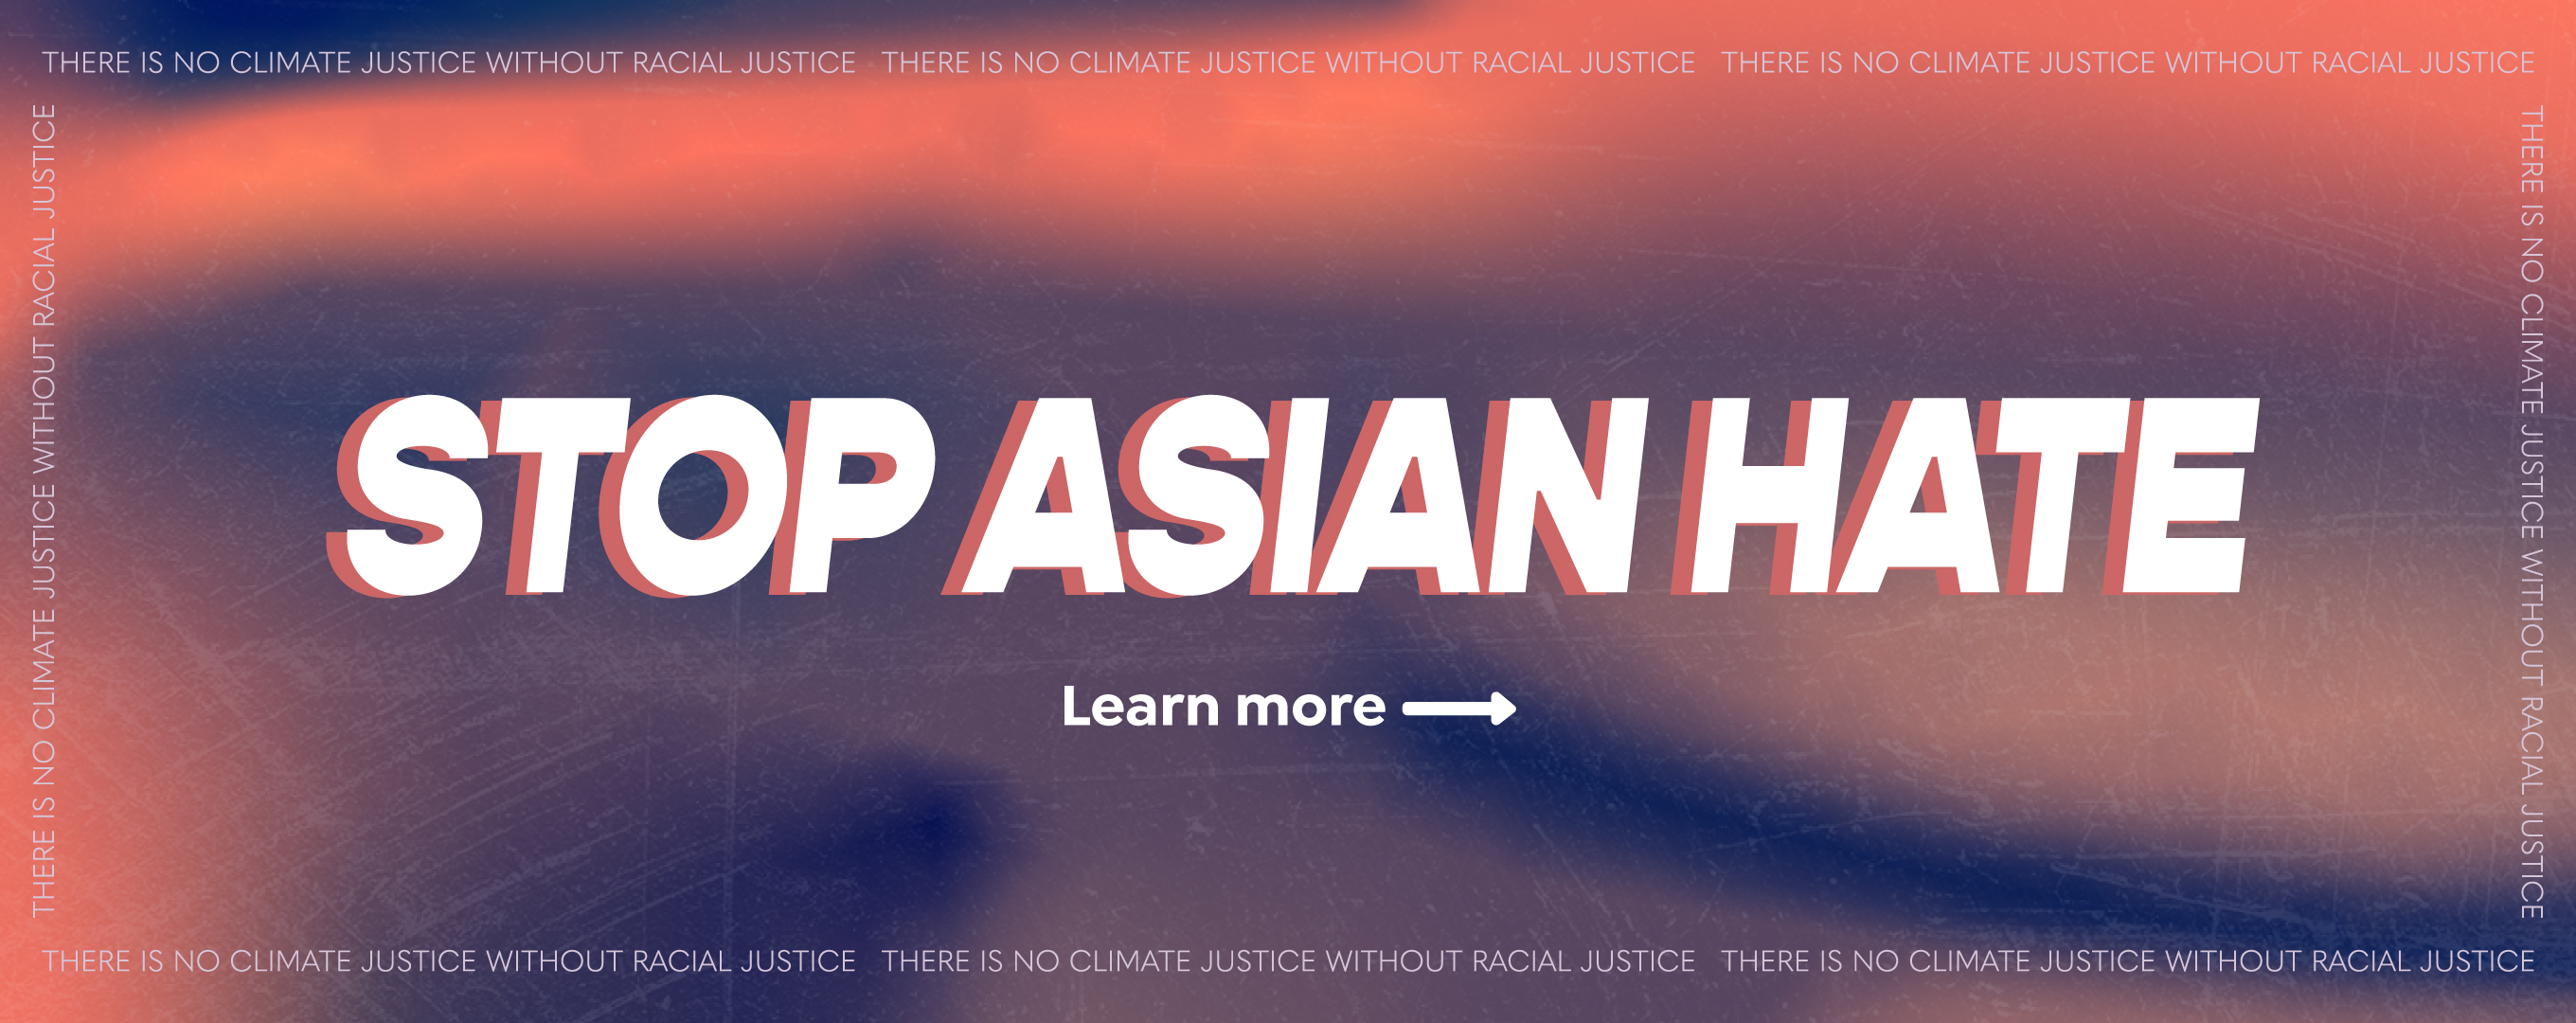 stop asian hate learn more graphic